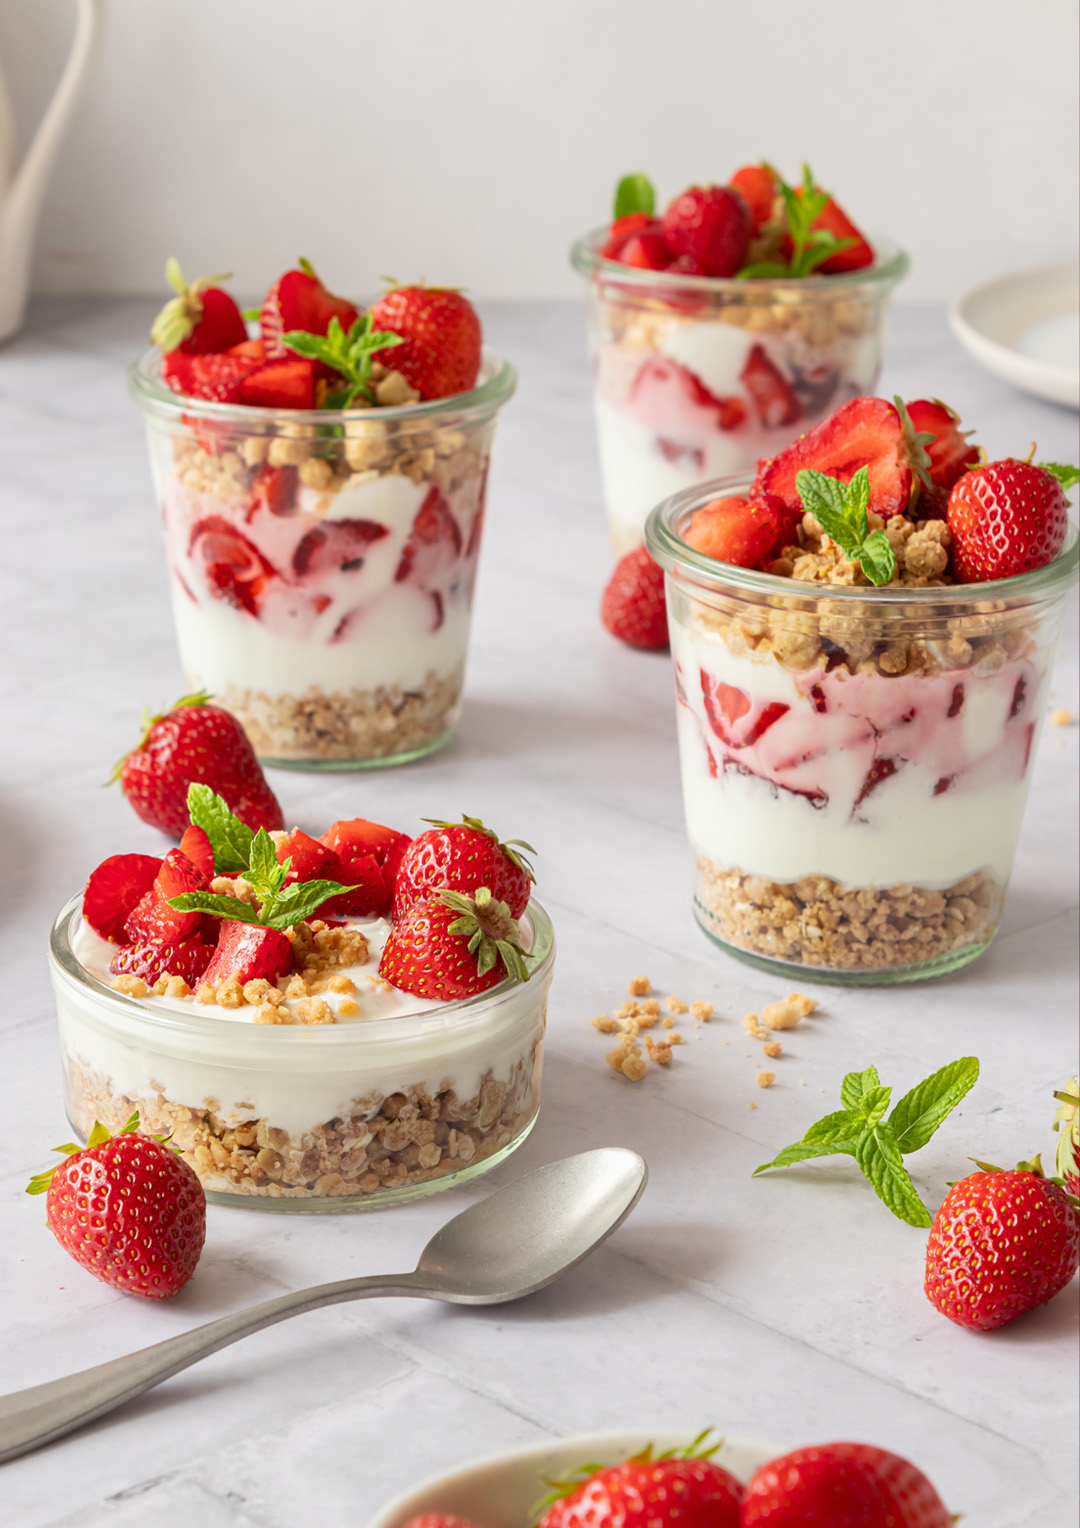 Strawberry-fromage frais-crumble